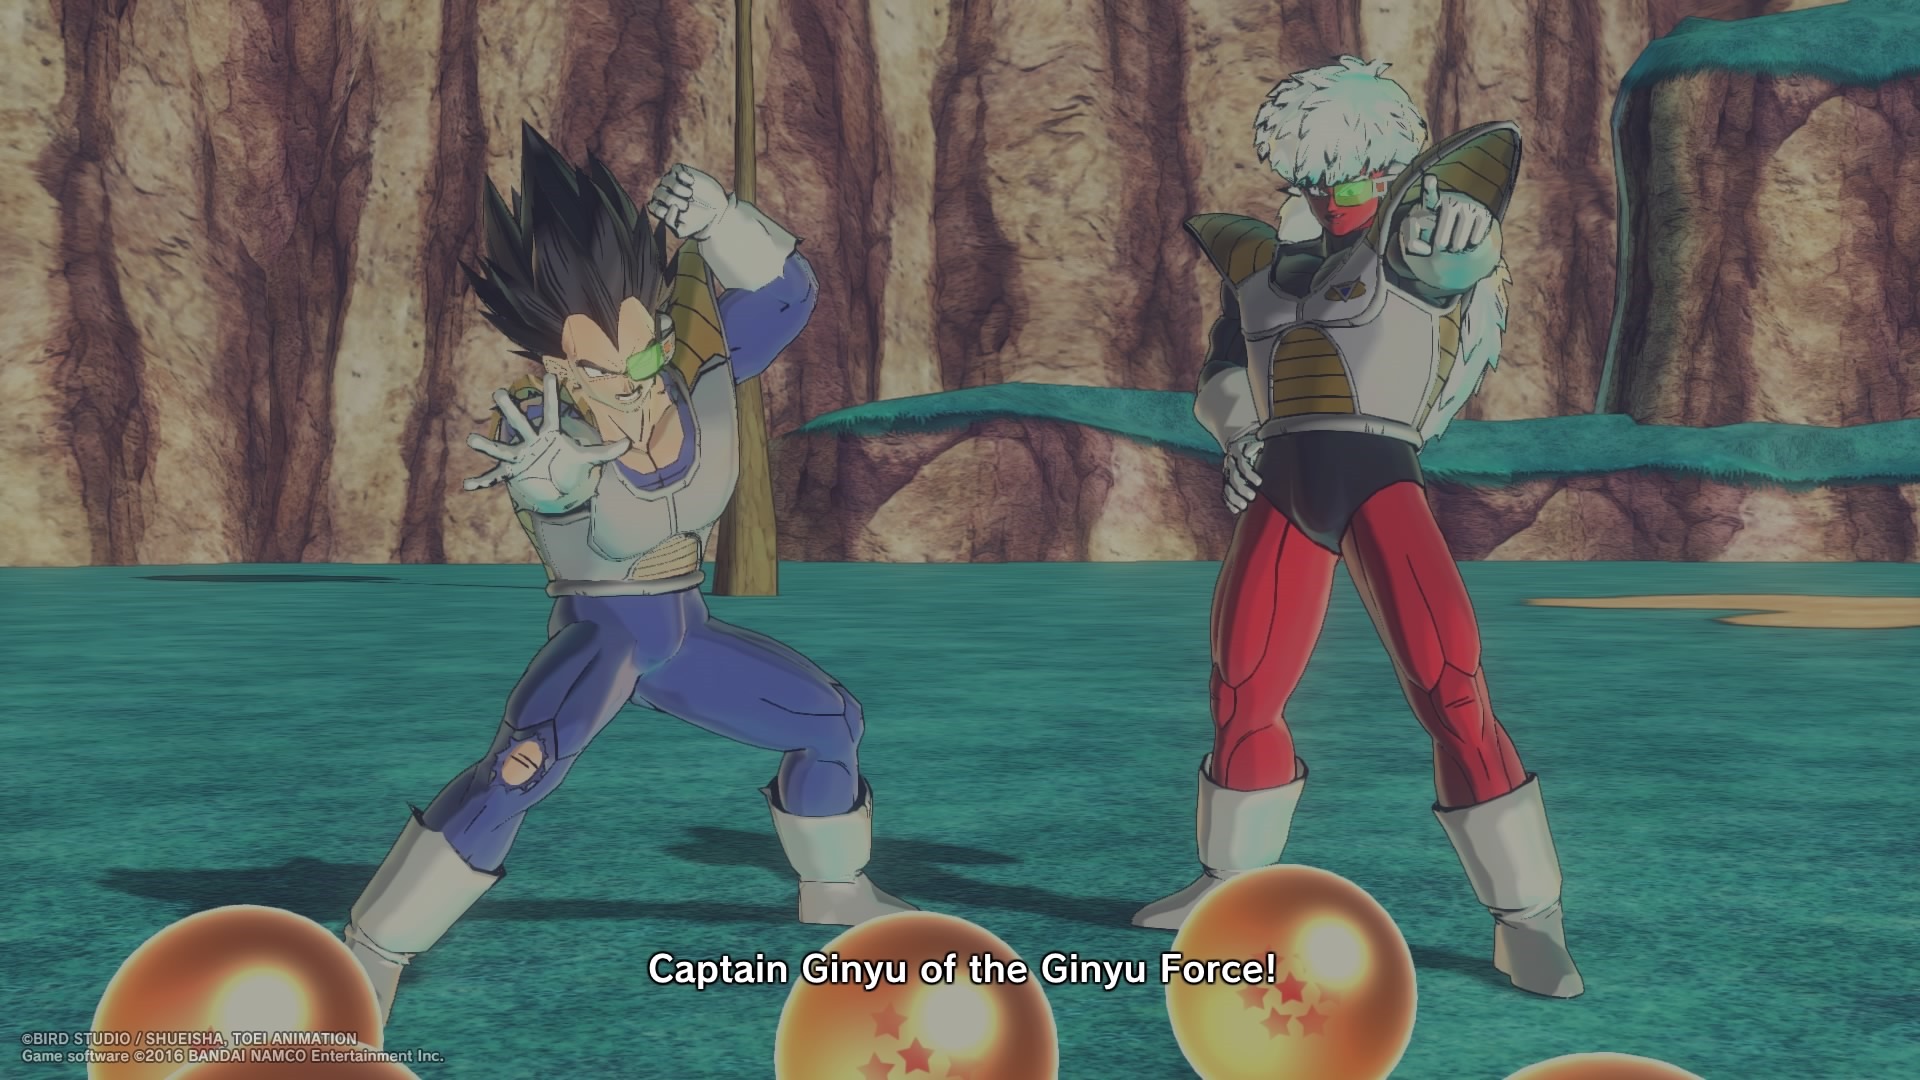 Savor As Much As Possible In Dragon Ball Xenoverse 2's Open Beta -  Siliconera